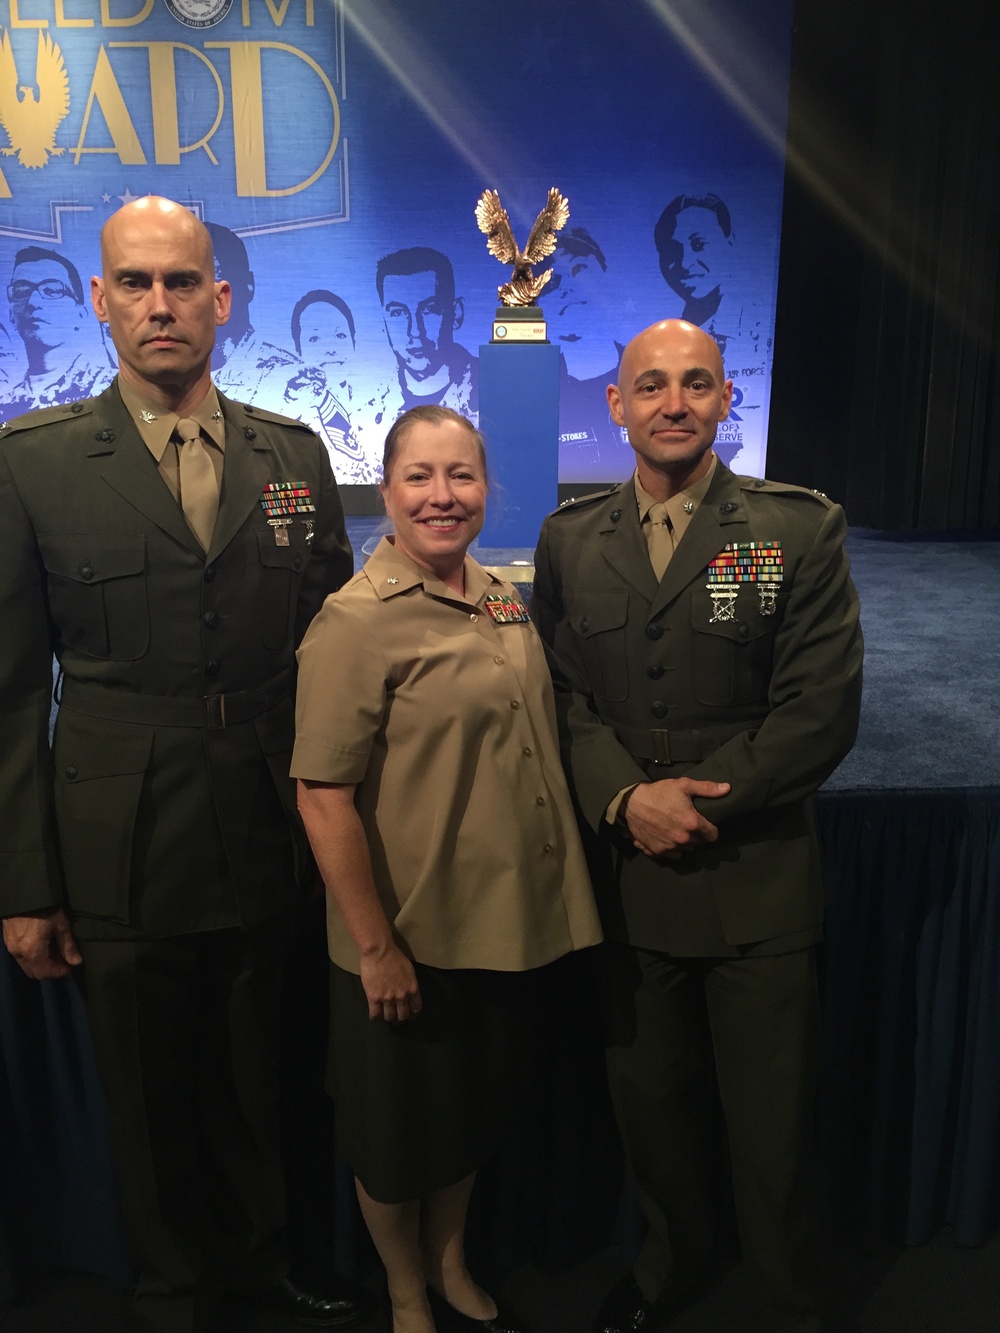 3D Civil Affairs Group Reservist Employer Honored with 2016 ESGR Freedom Award